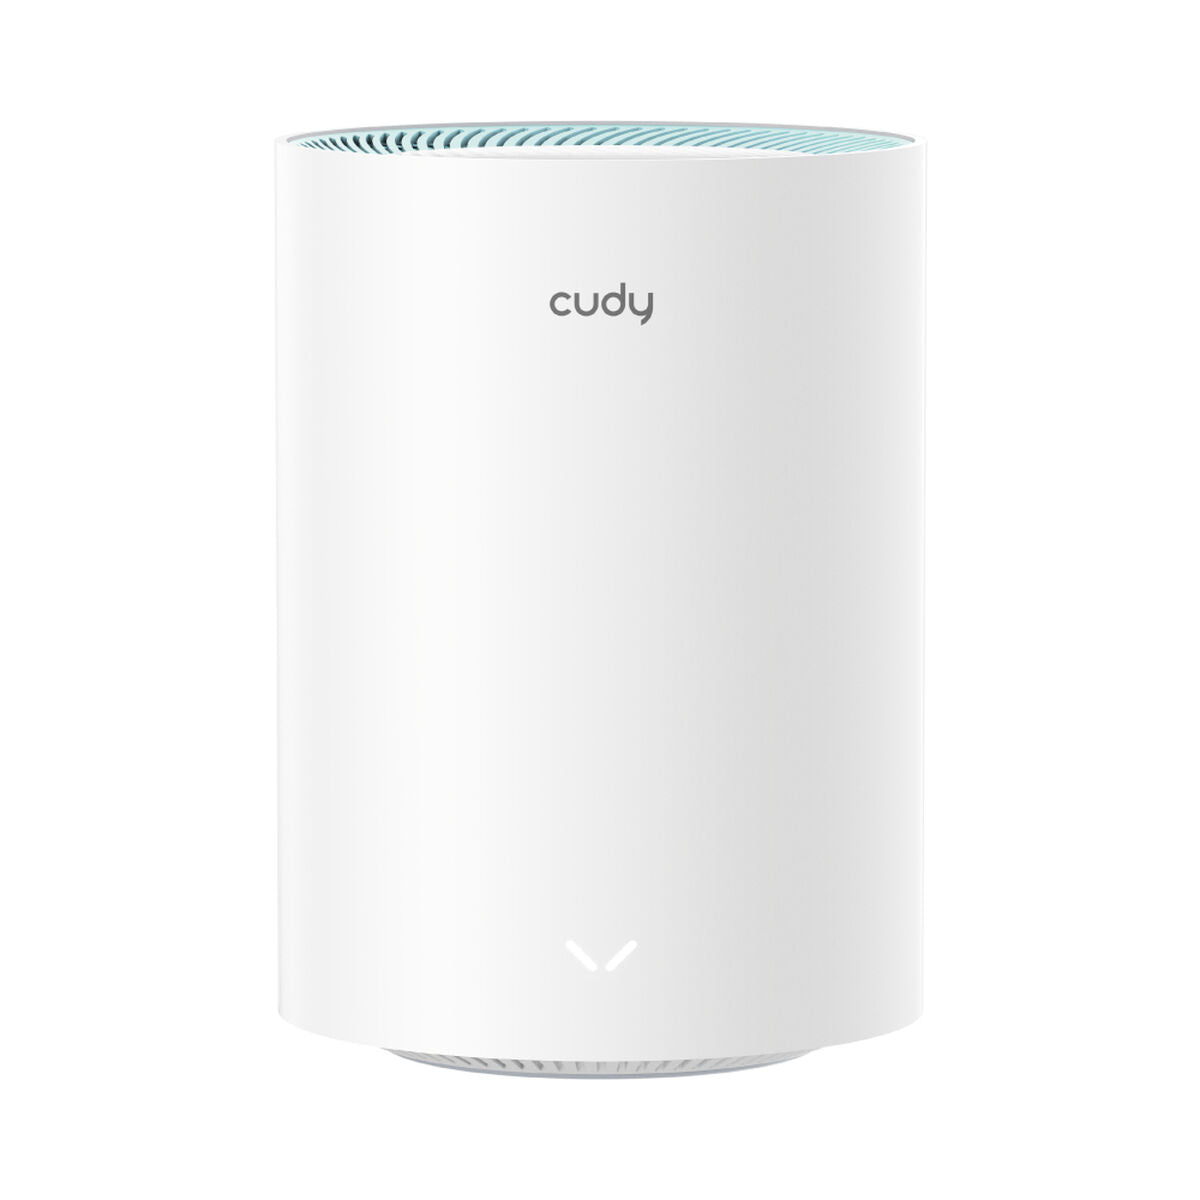 Cudy M1300 Access Point 1-PACK